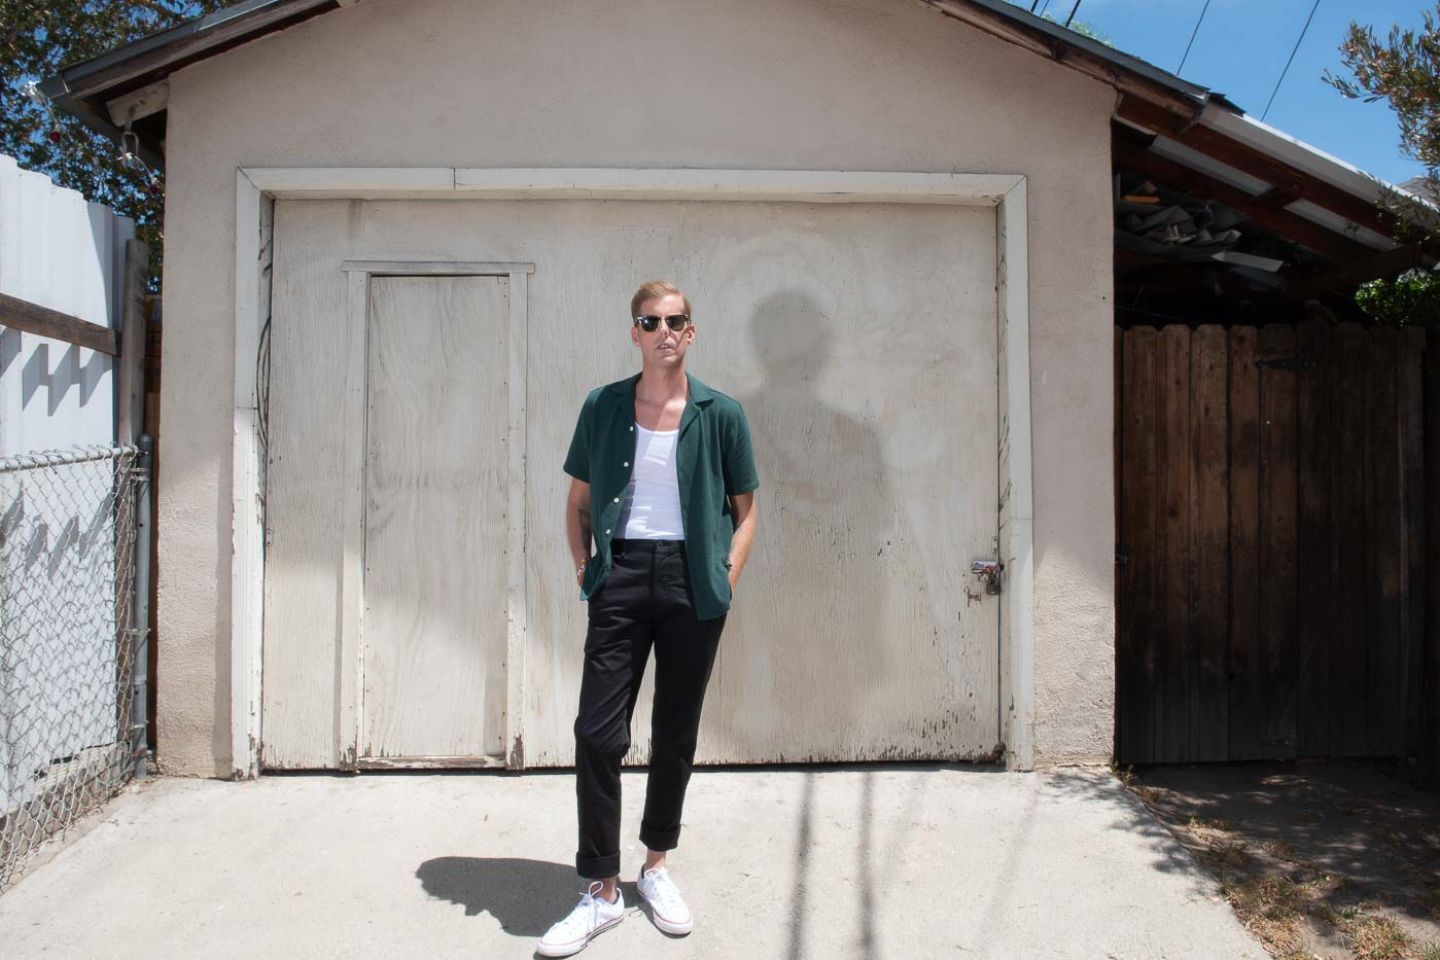 The past, present and future projects of Andrew McMahon